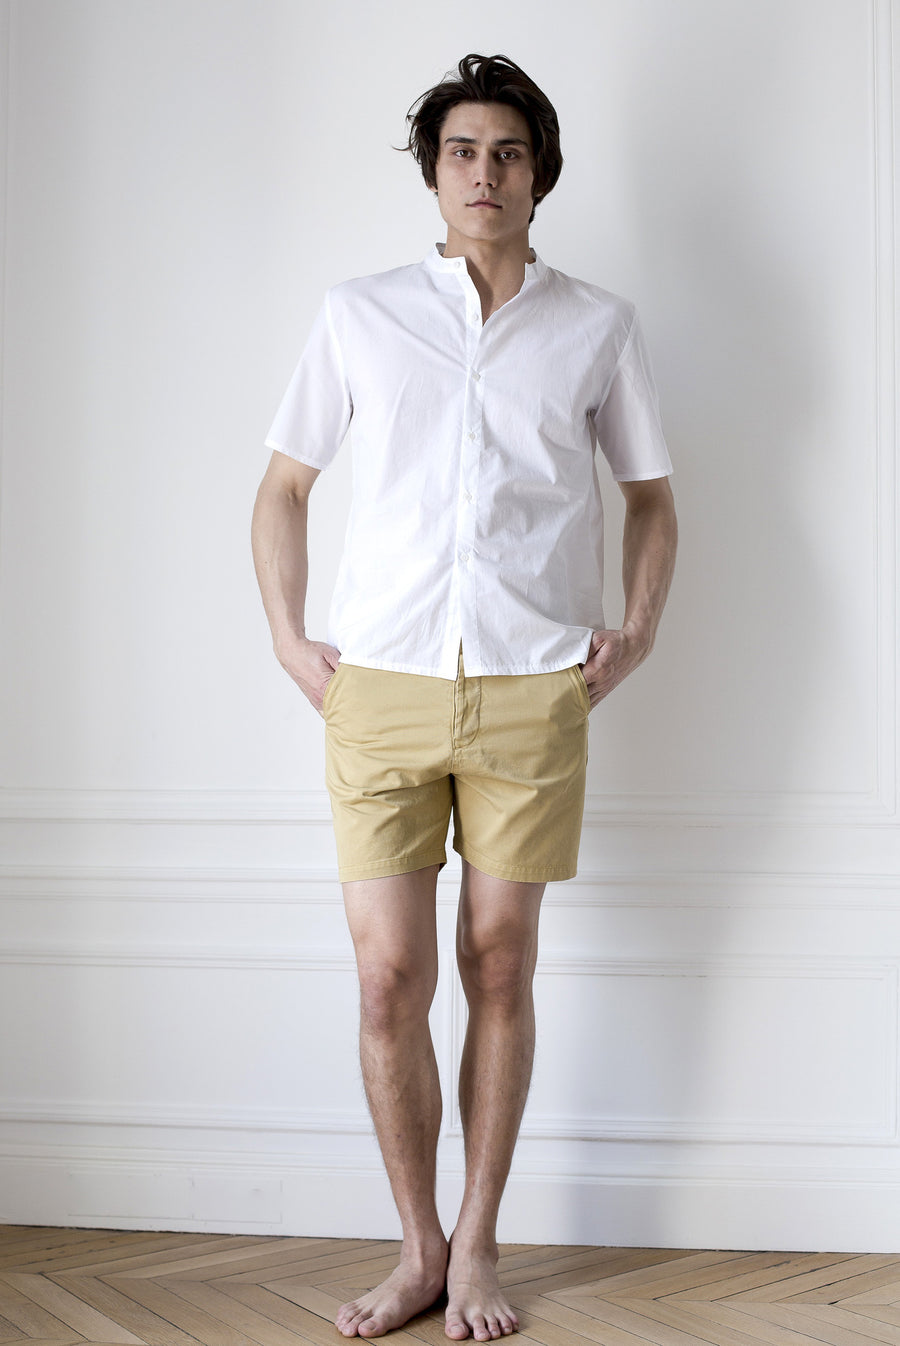 the white briefs twill shorts in a sturdy woven cotton fabric